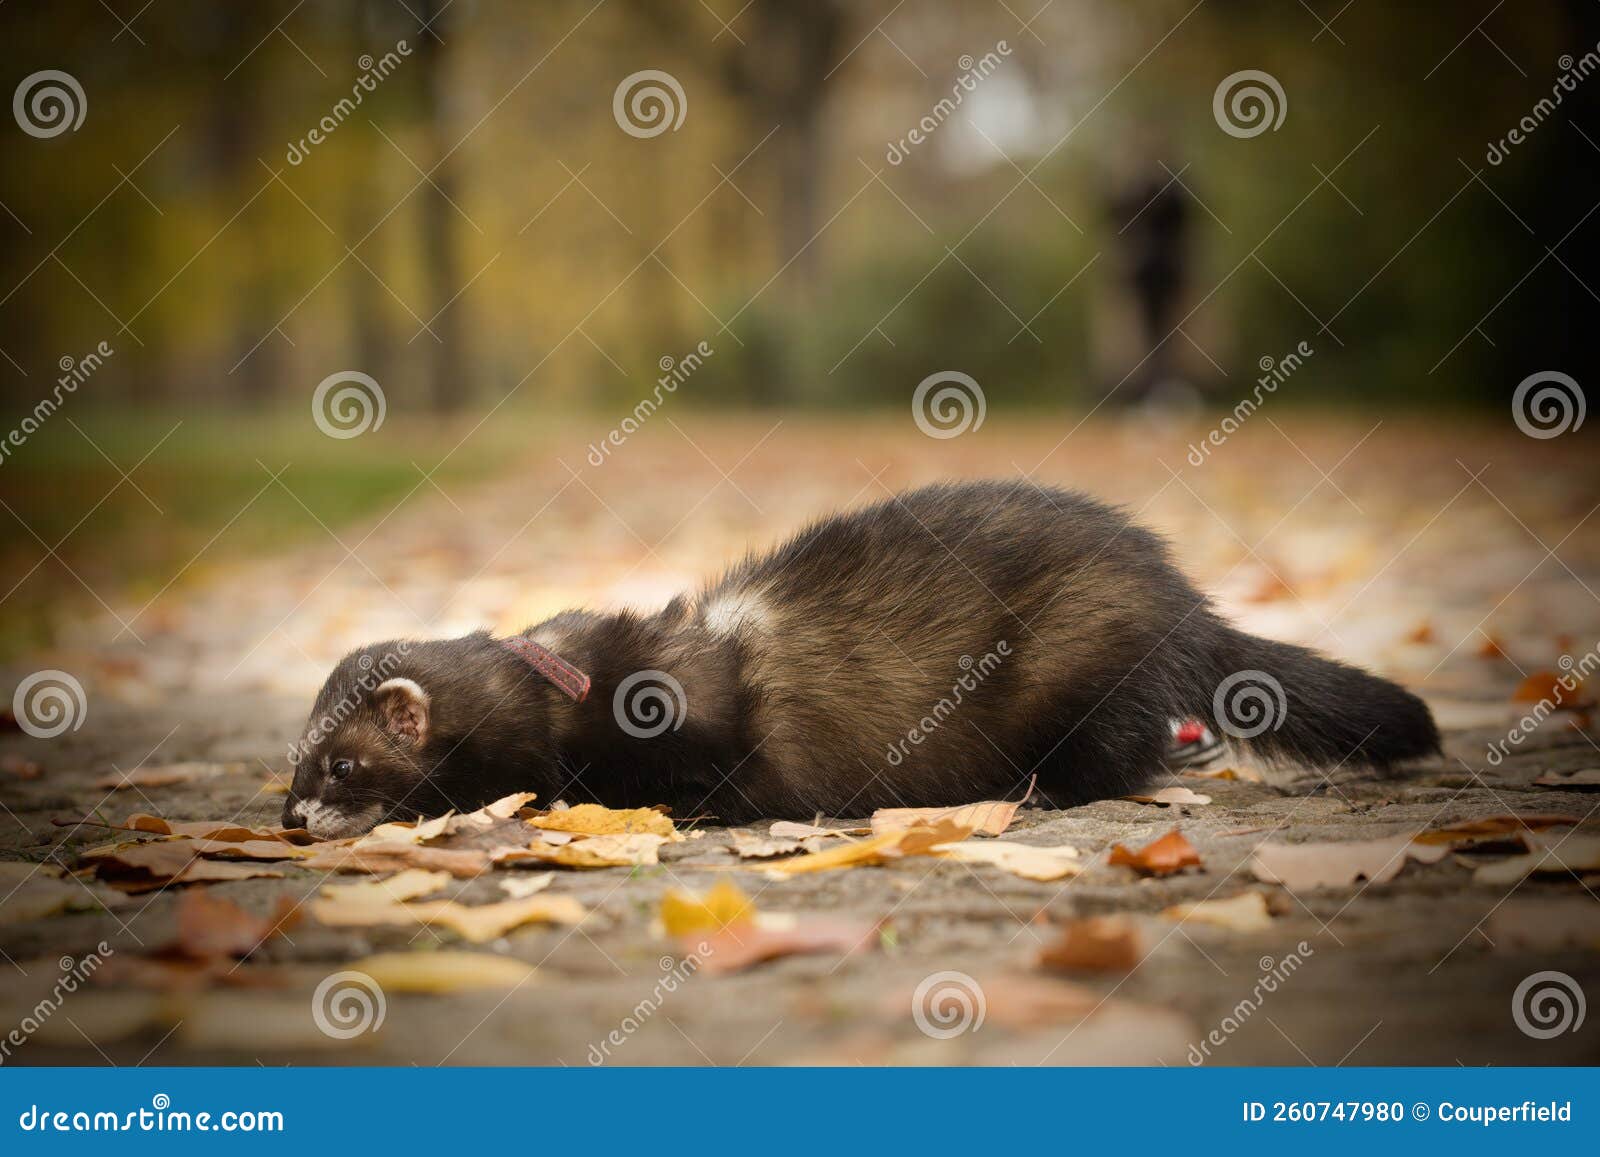 pretty dark sable color ferret exploring autumn park with leaves and holes